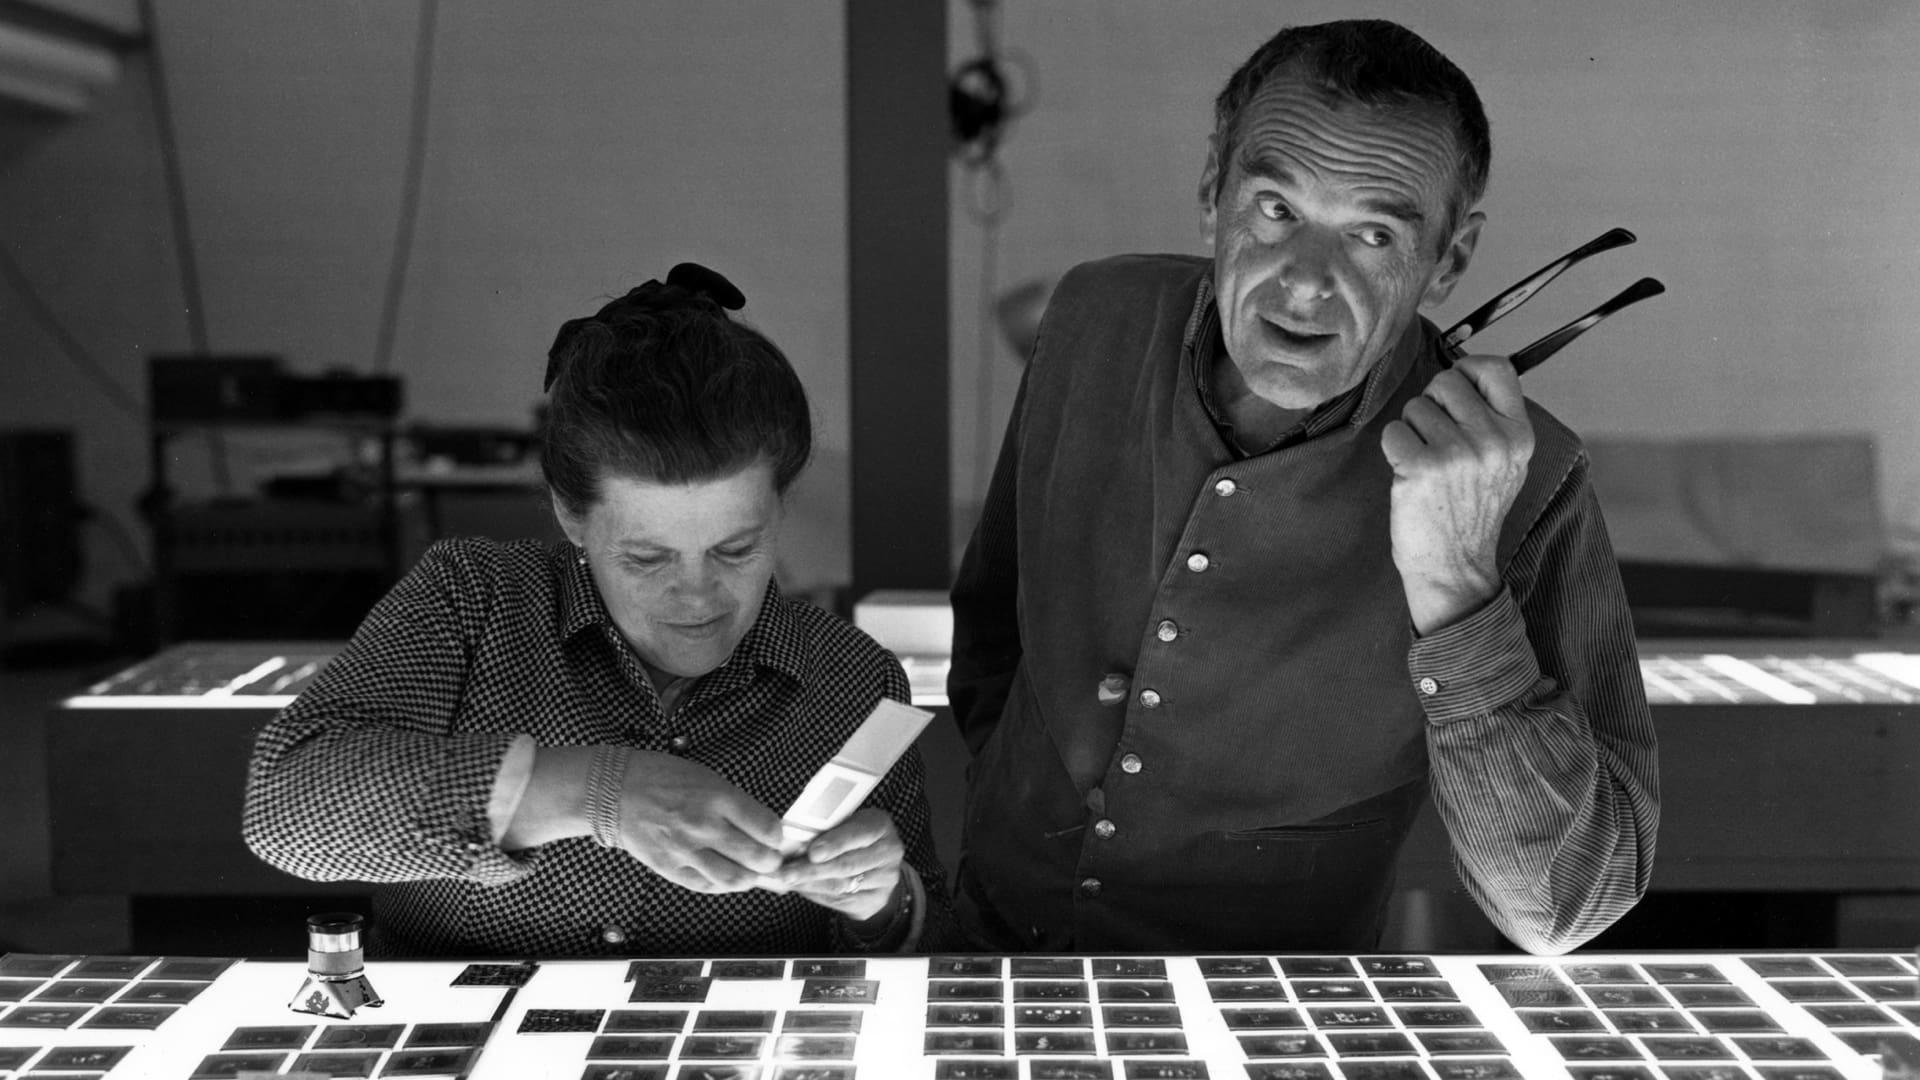 Eames: The Architect and the Painter backdrop